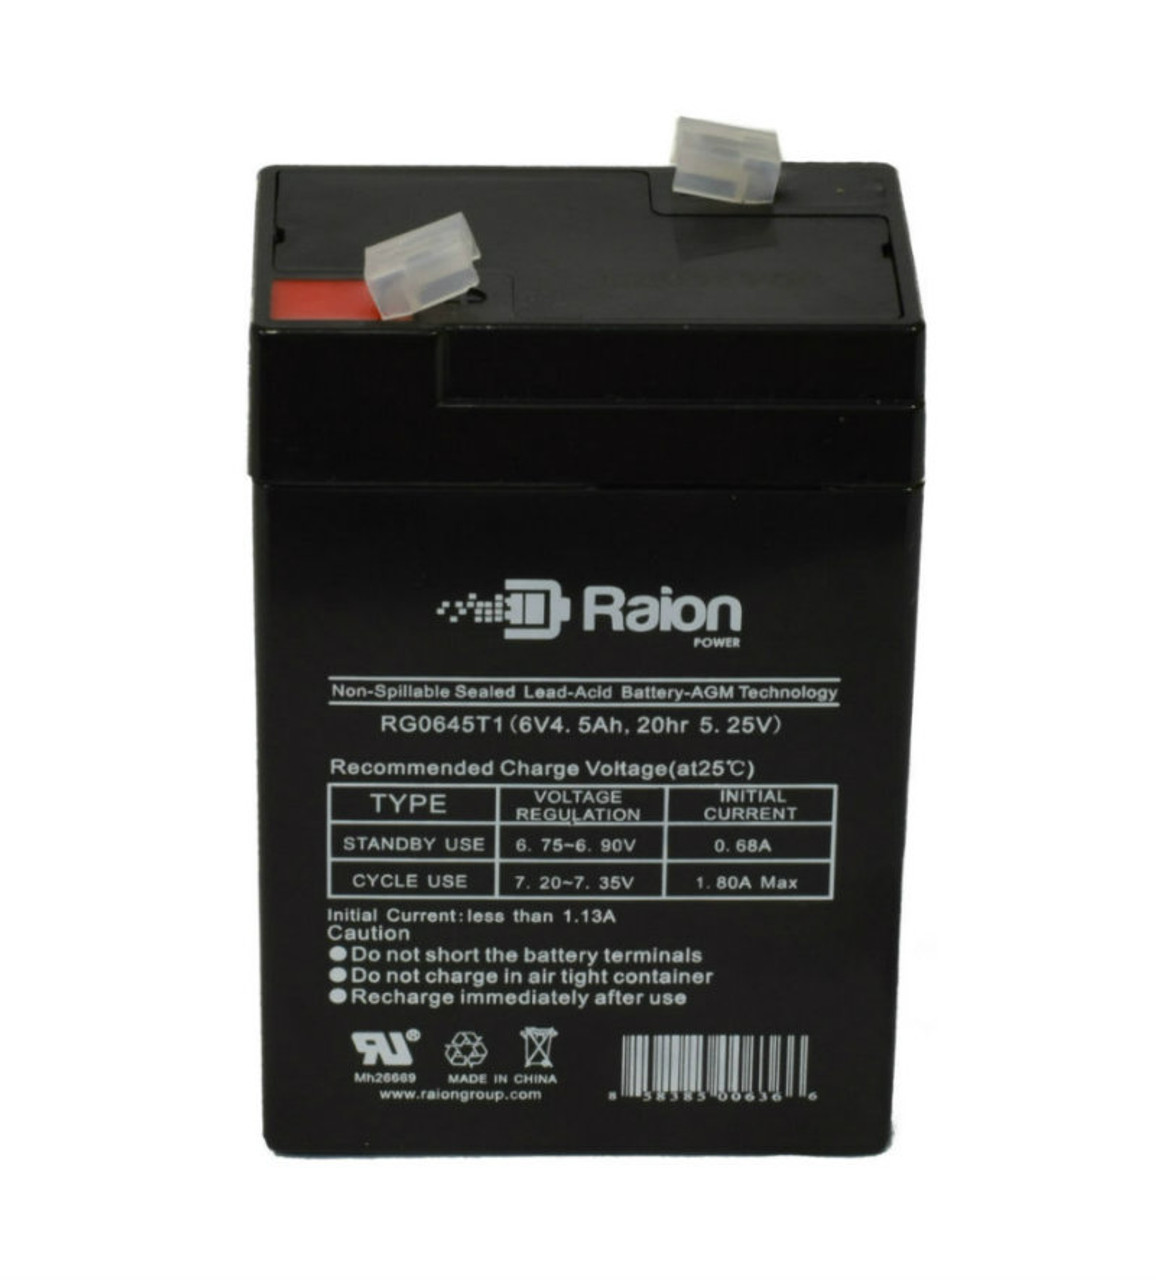 Raion Power RG0645T1 Replacement Battery Cartridge for Peg Perego IGED1038 6V Grinta XL Police